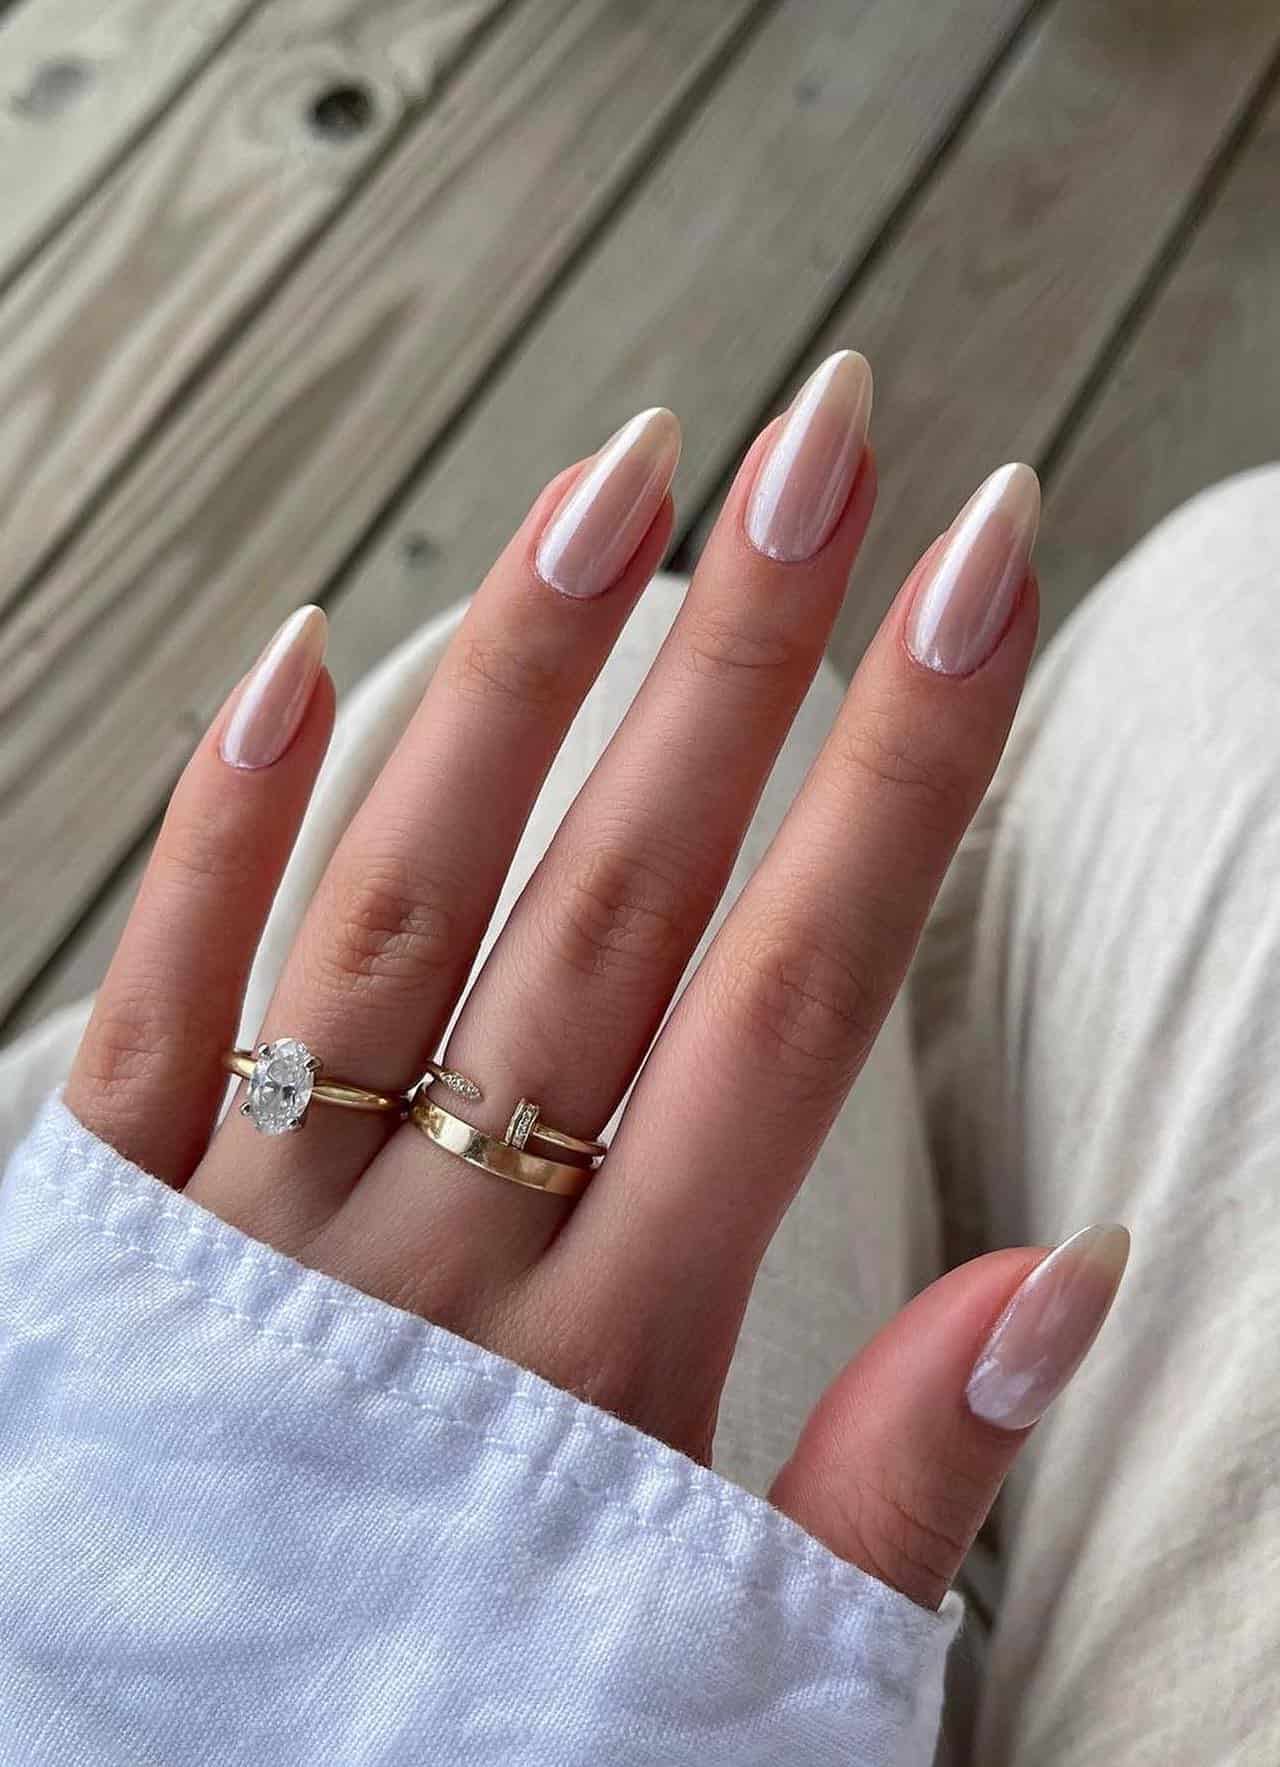 A hand with medium white chrome almond nails